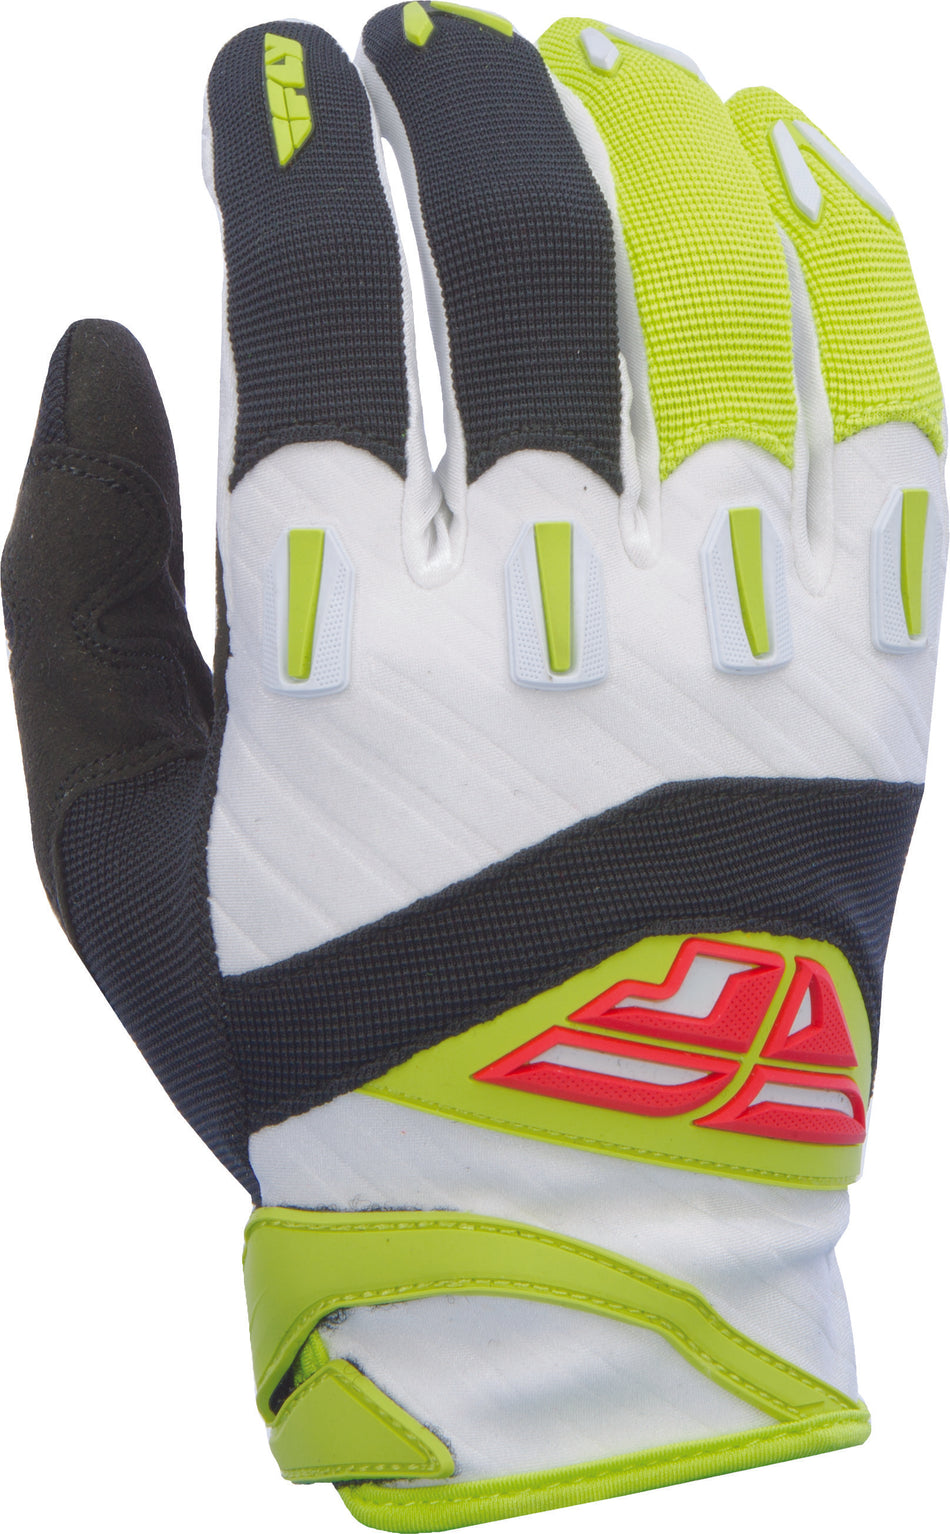 FLY RACING Youth F-16 Glove Black/Lime Sz 1 Y3xs 370-91501